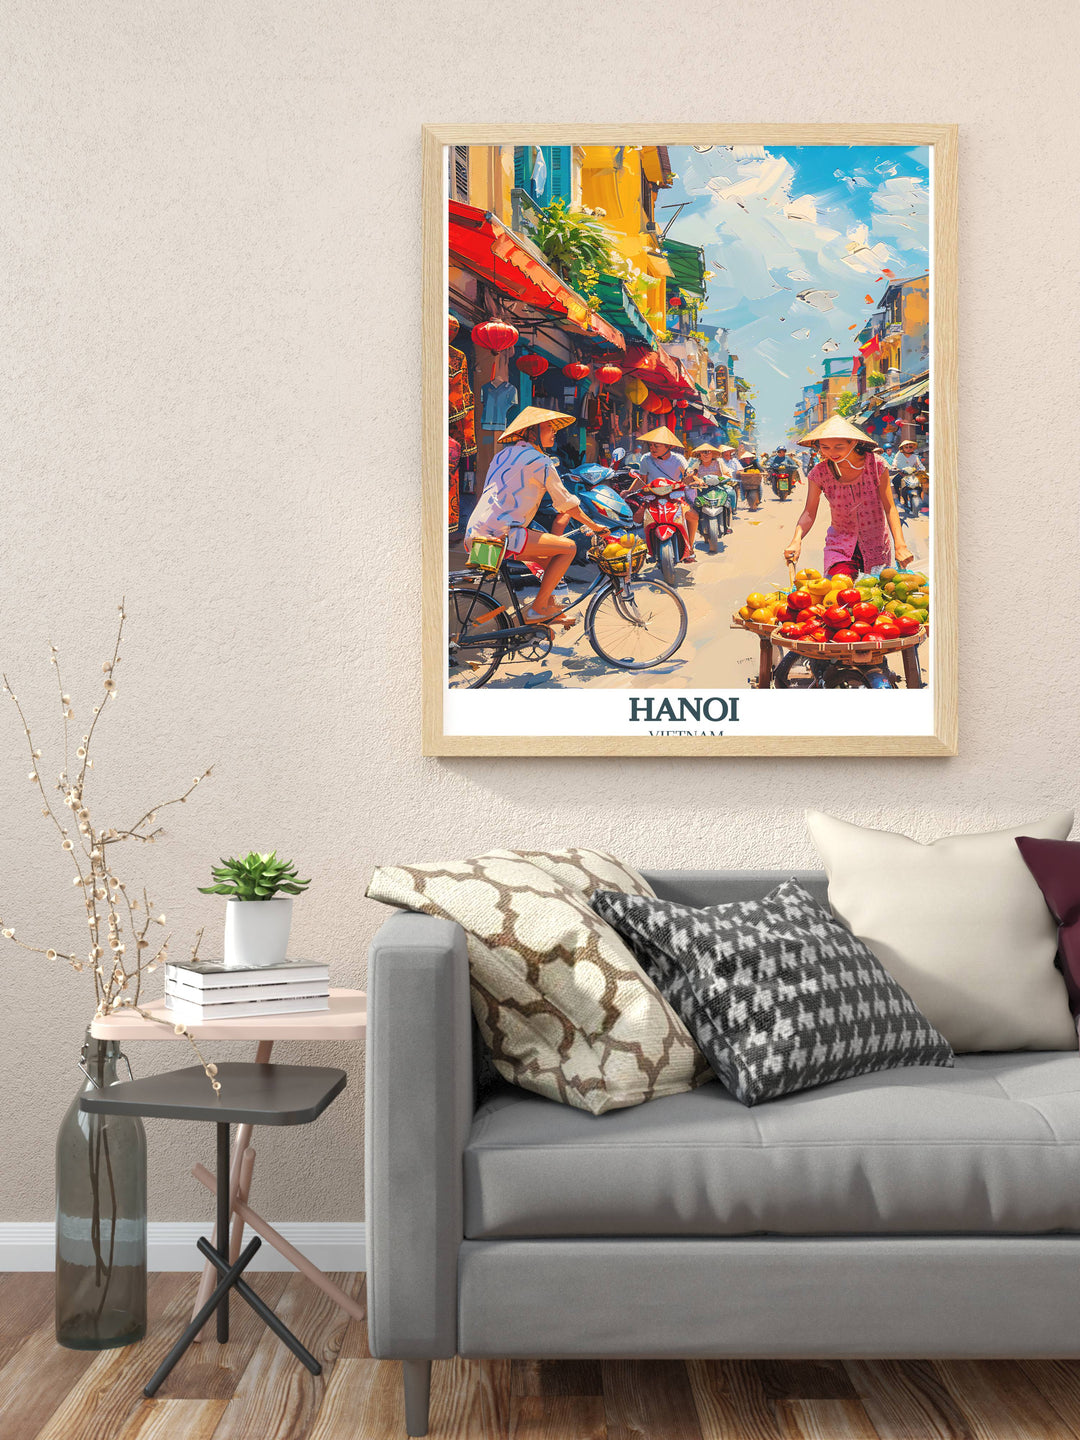 Housewarming gift idea featuring a detailed print of Hanoi street life, ideal for those fascinated by the culture of Vietnam.